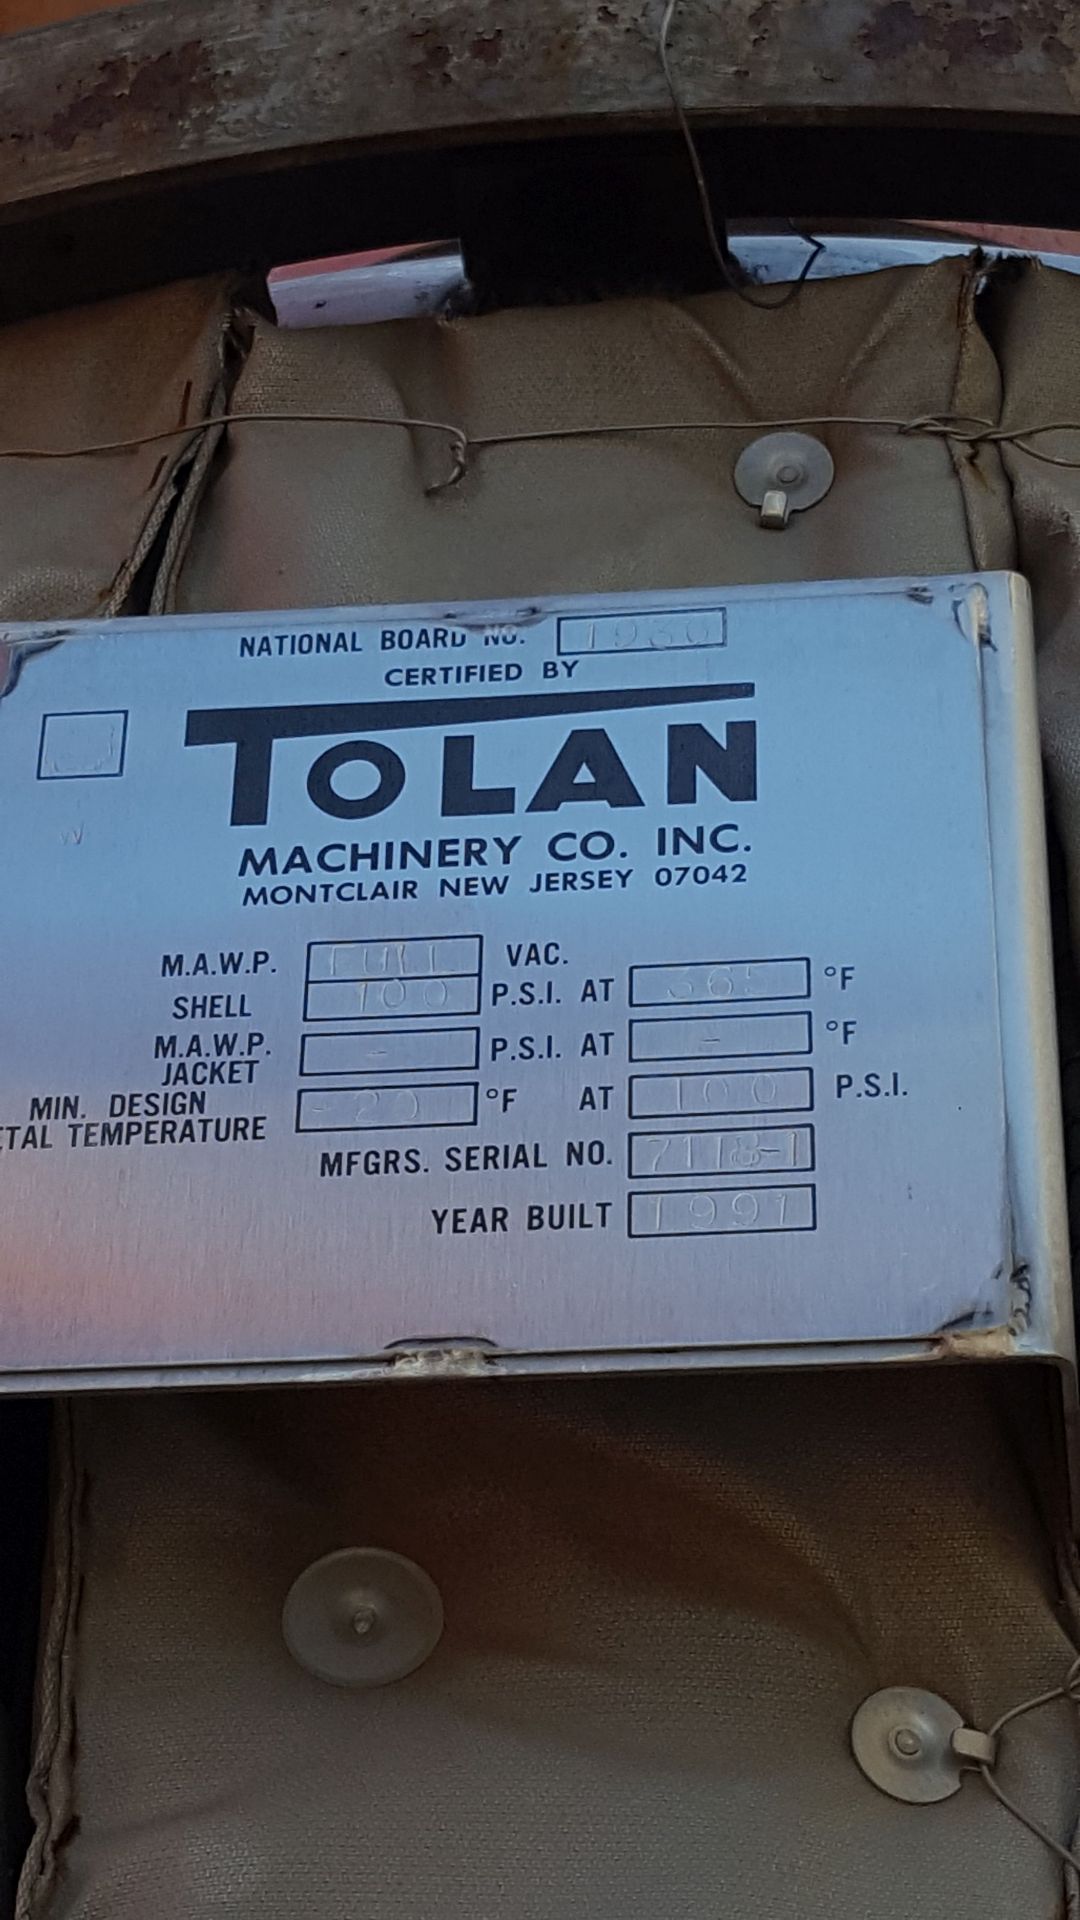 Tolan Machinery Stainless Steel Vessel 65" x 36" National Board 1936 - Image 5 of 7